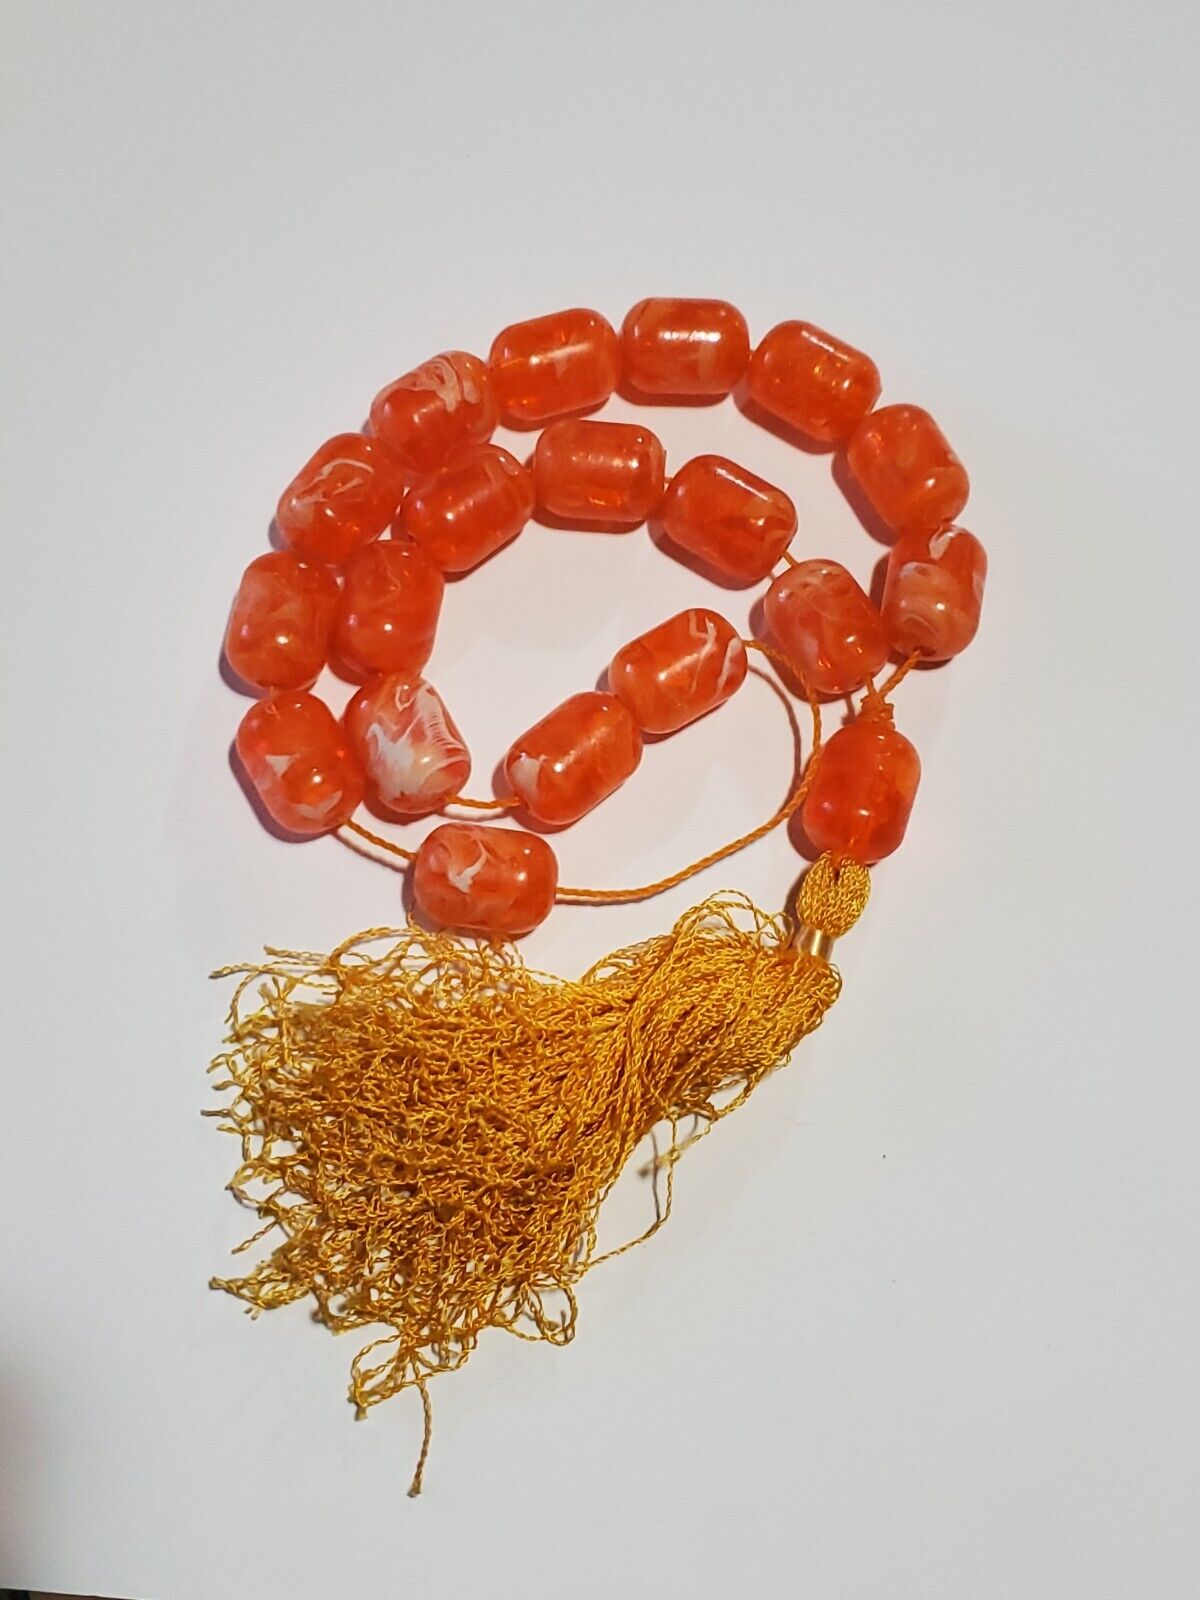 Antique Large Bakelite Glowing Marbled Amber Color Prayer Beads 158 Grams Tested